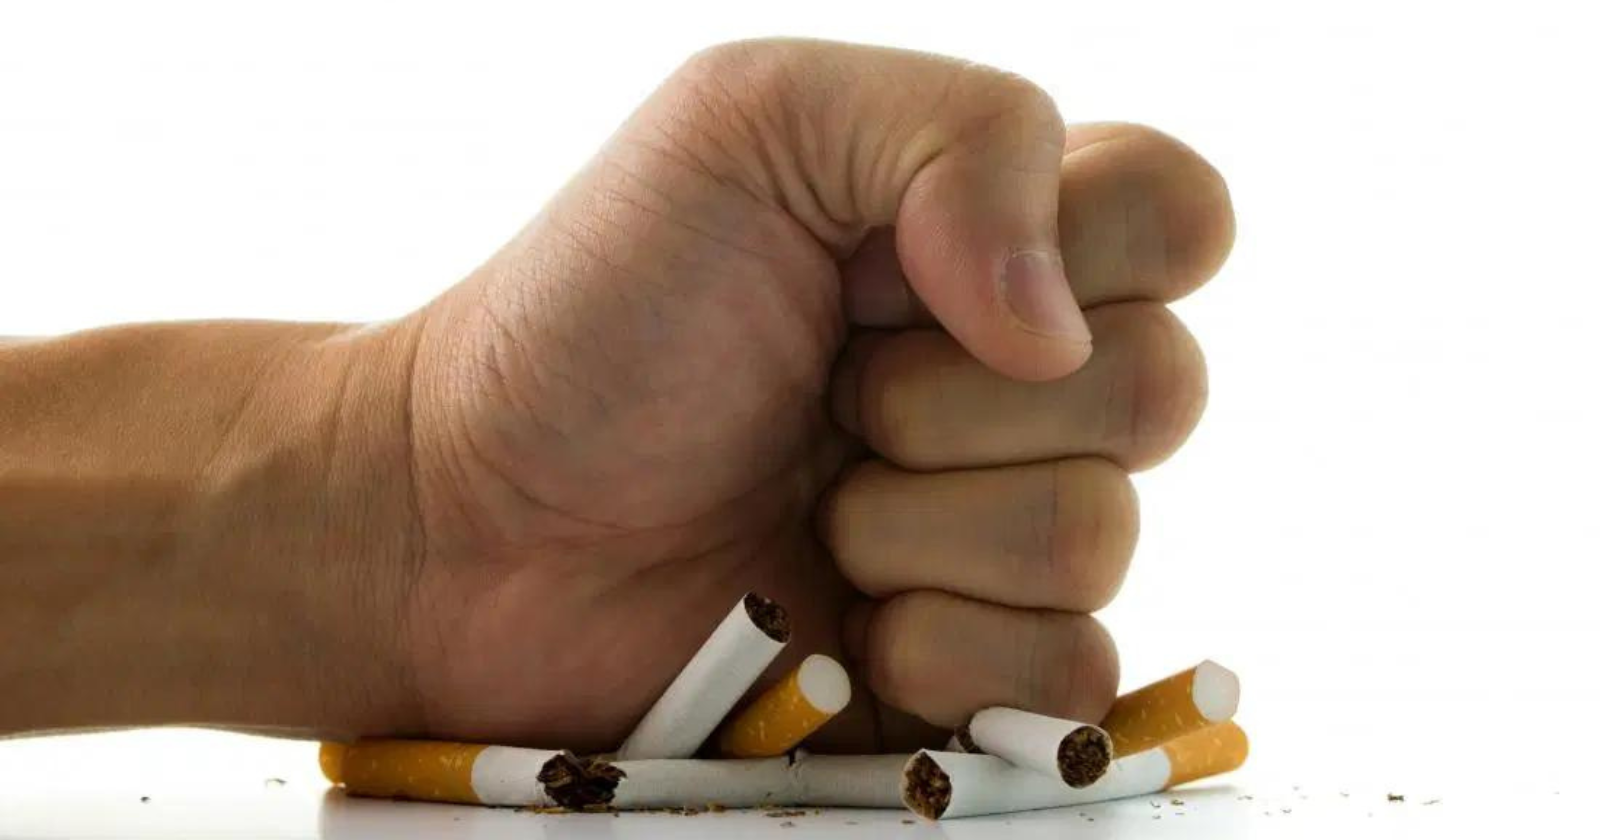 Kicking the habit: Discover the health benefits of quitting smoking